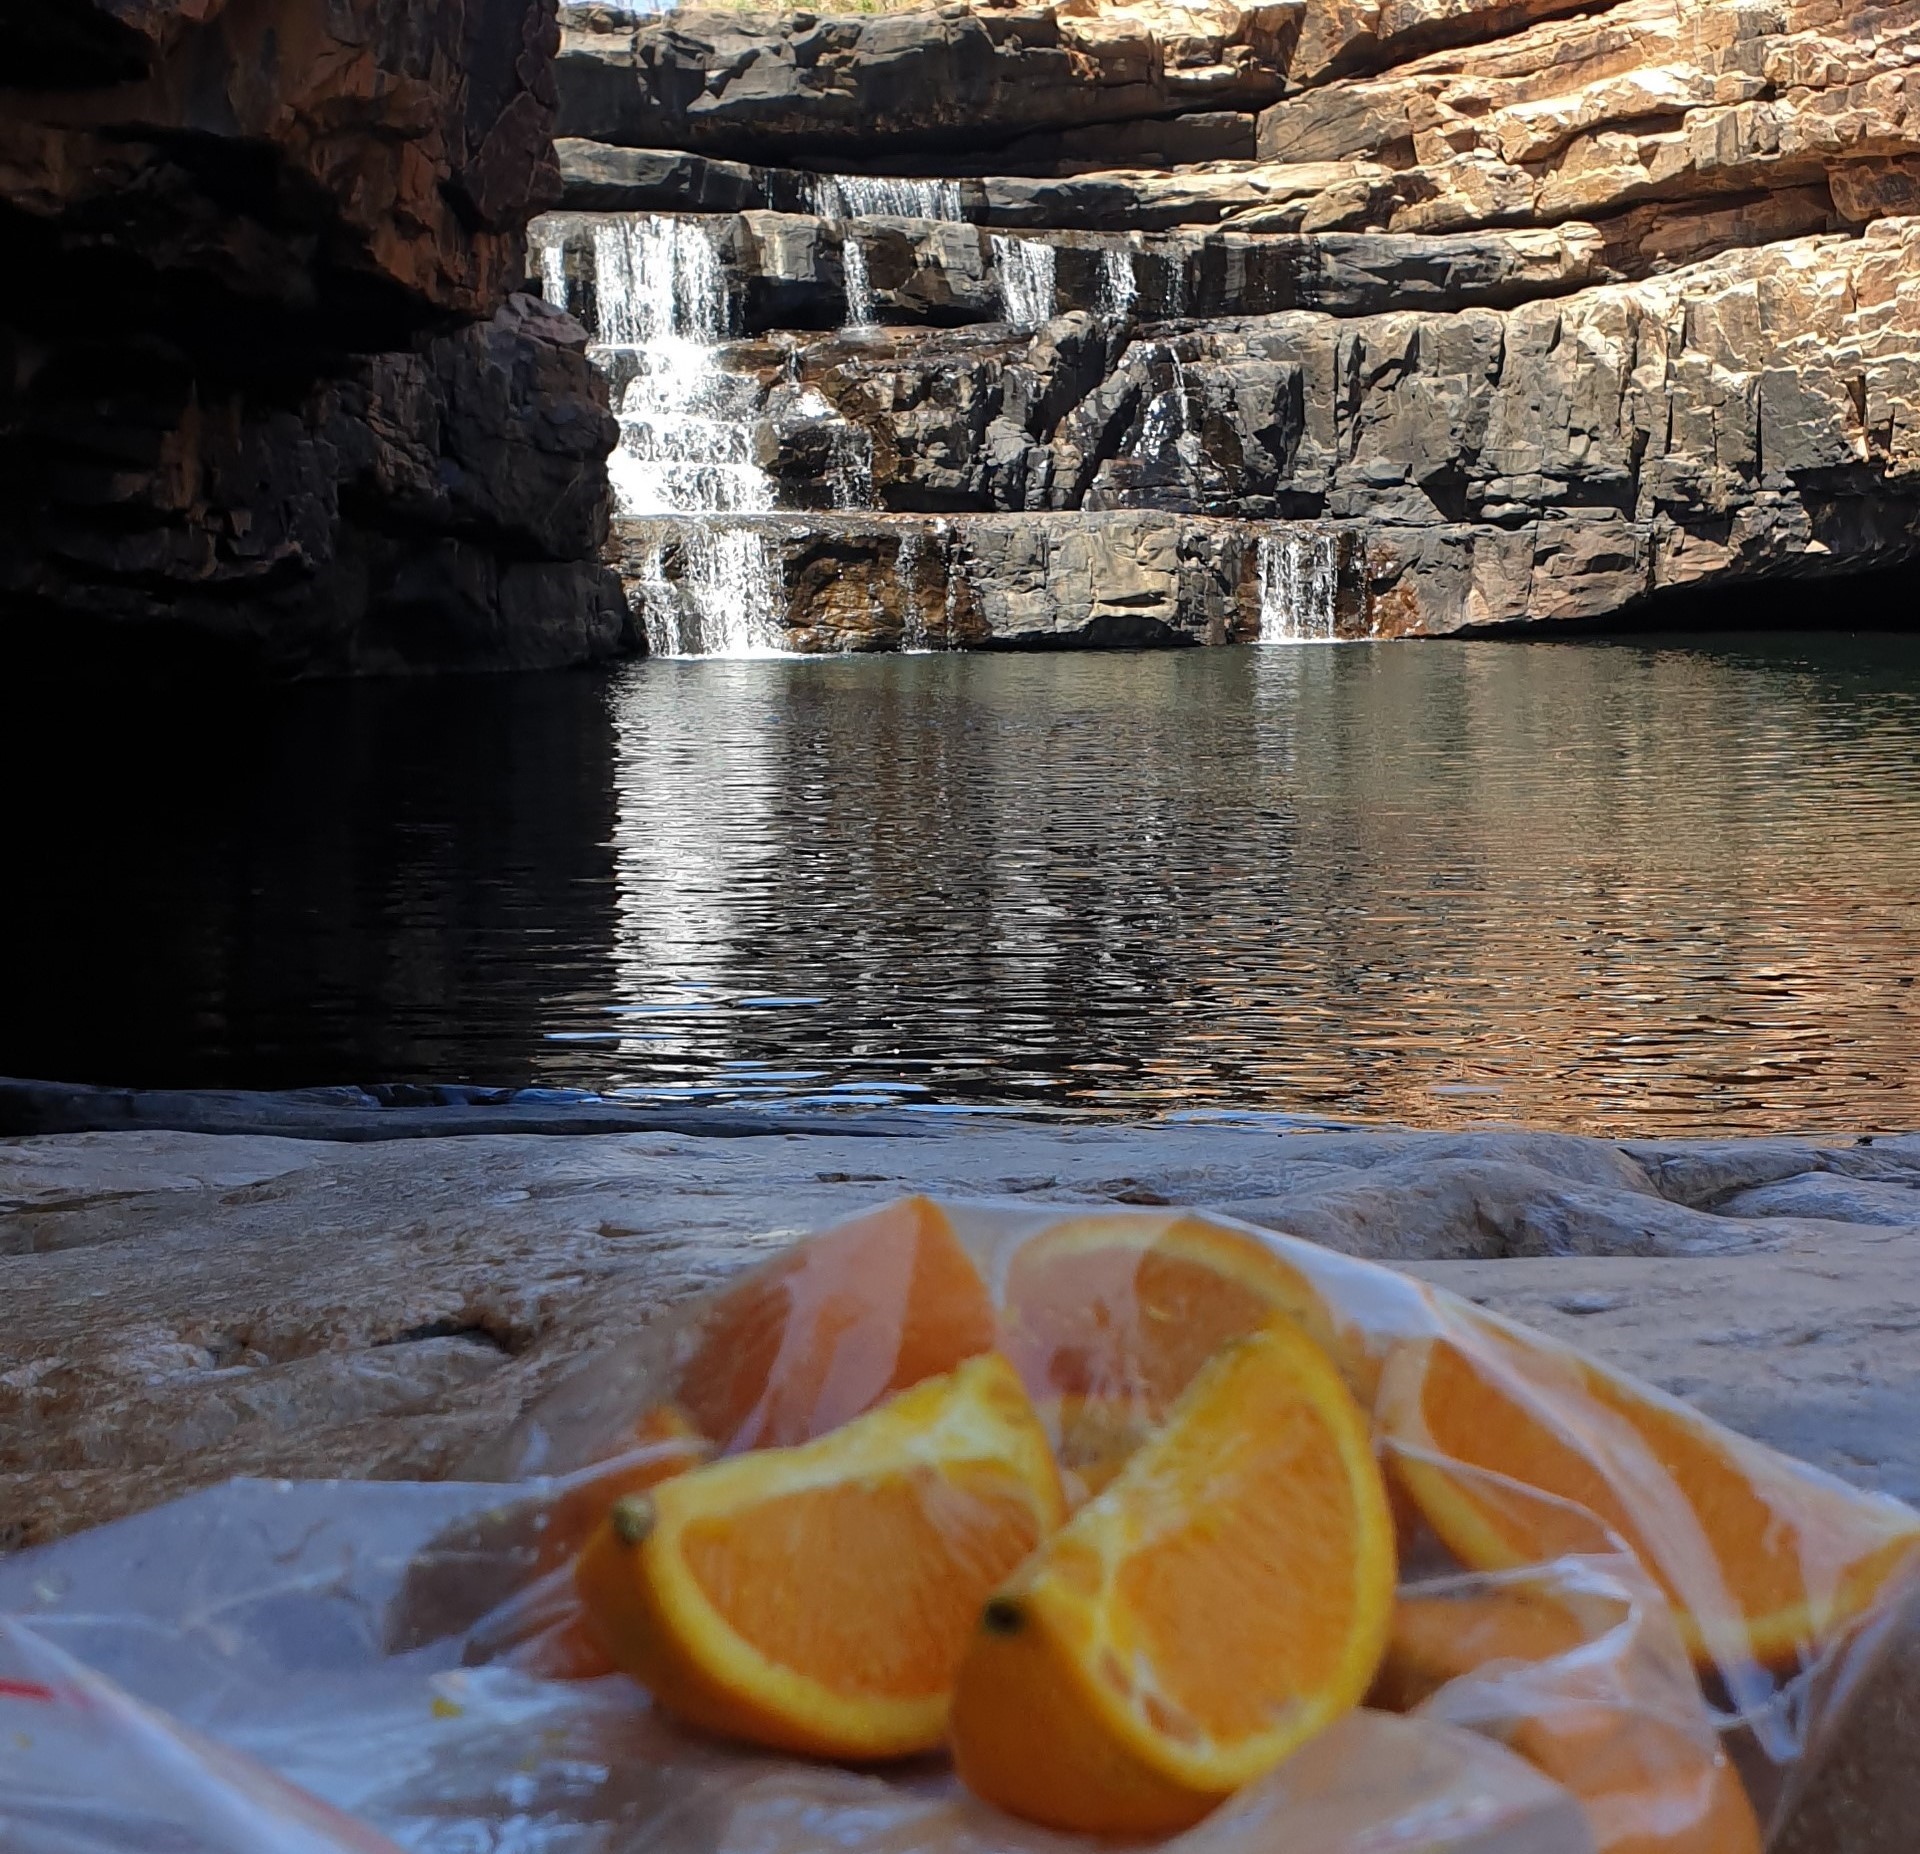 Oranges and waterfall